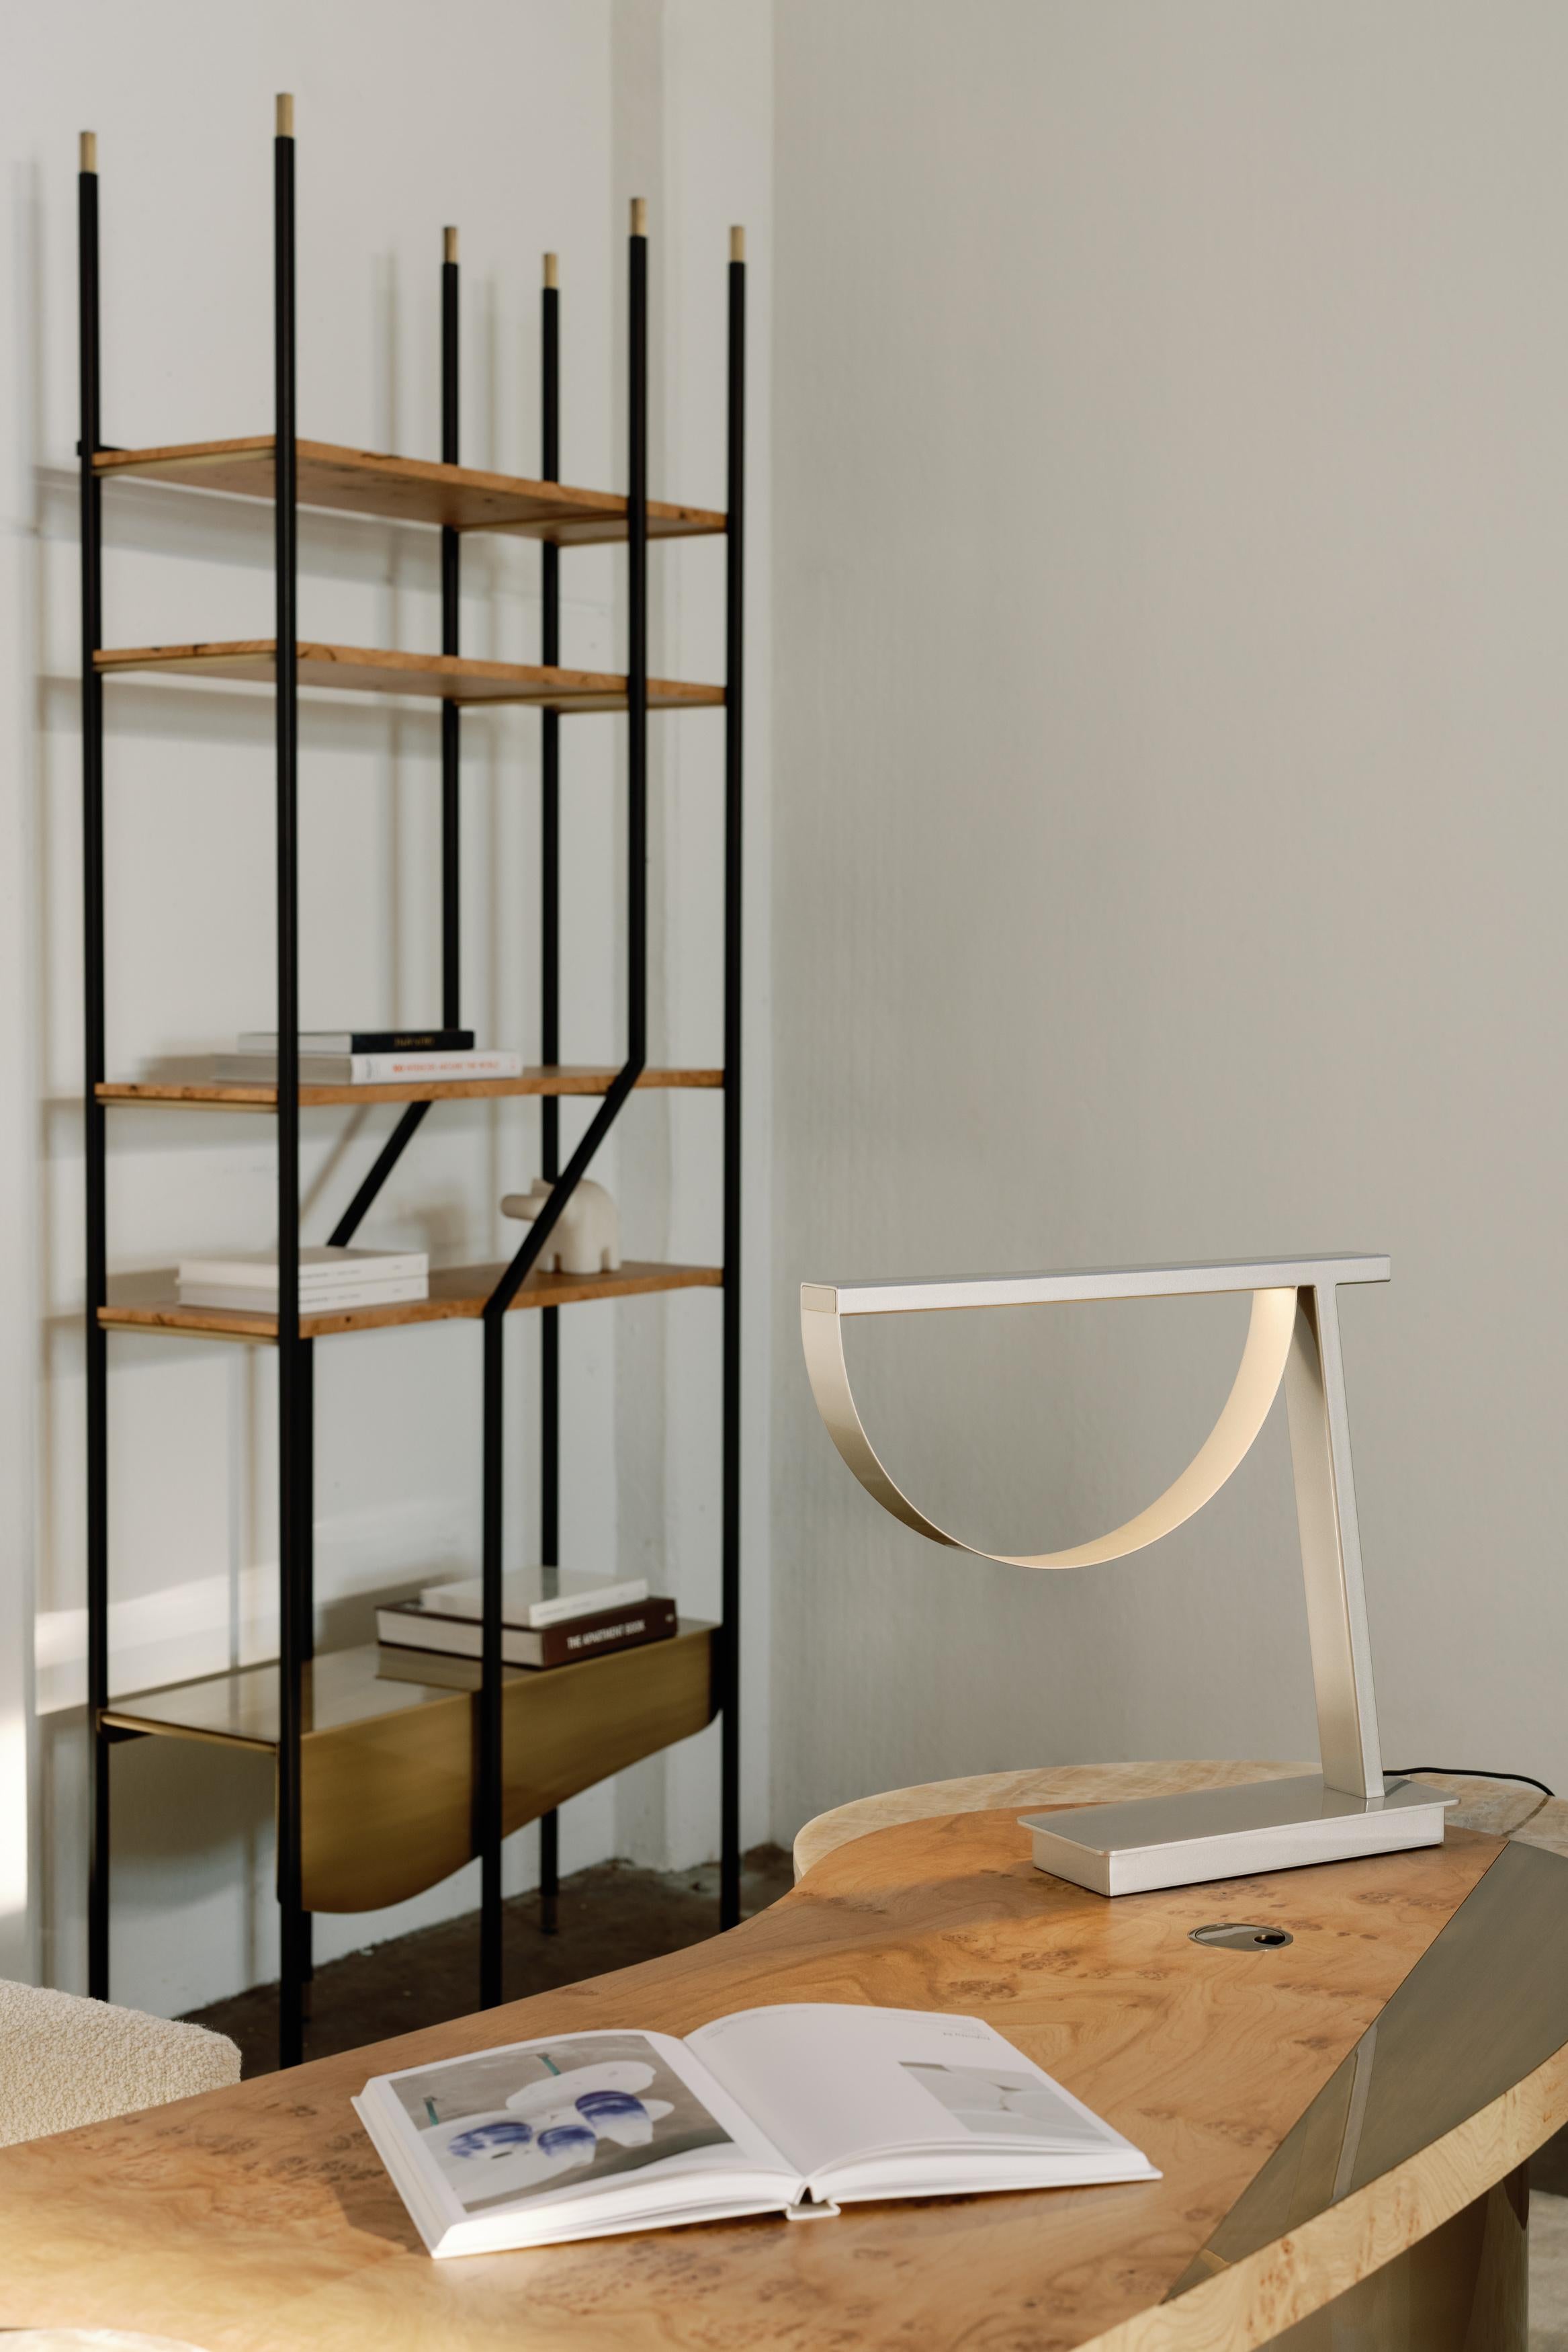 Set of 2 Lage bookcases, Contemporary collection, handcrafted in Portugal - Europe by Greenapple.

The Lage modern bookcase was designed to be the focal point in any living area or office. Its asymmetrical design draws inspiration from the top view